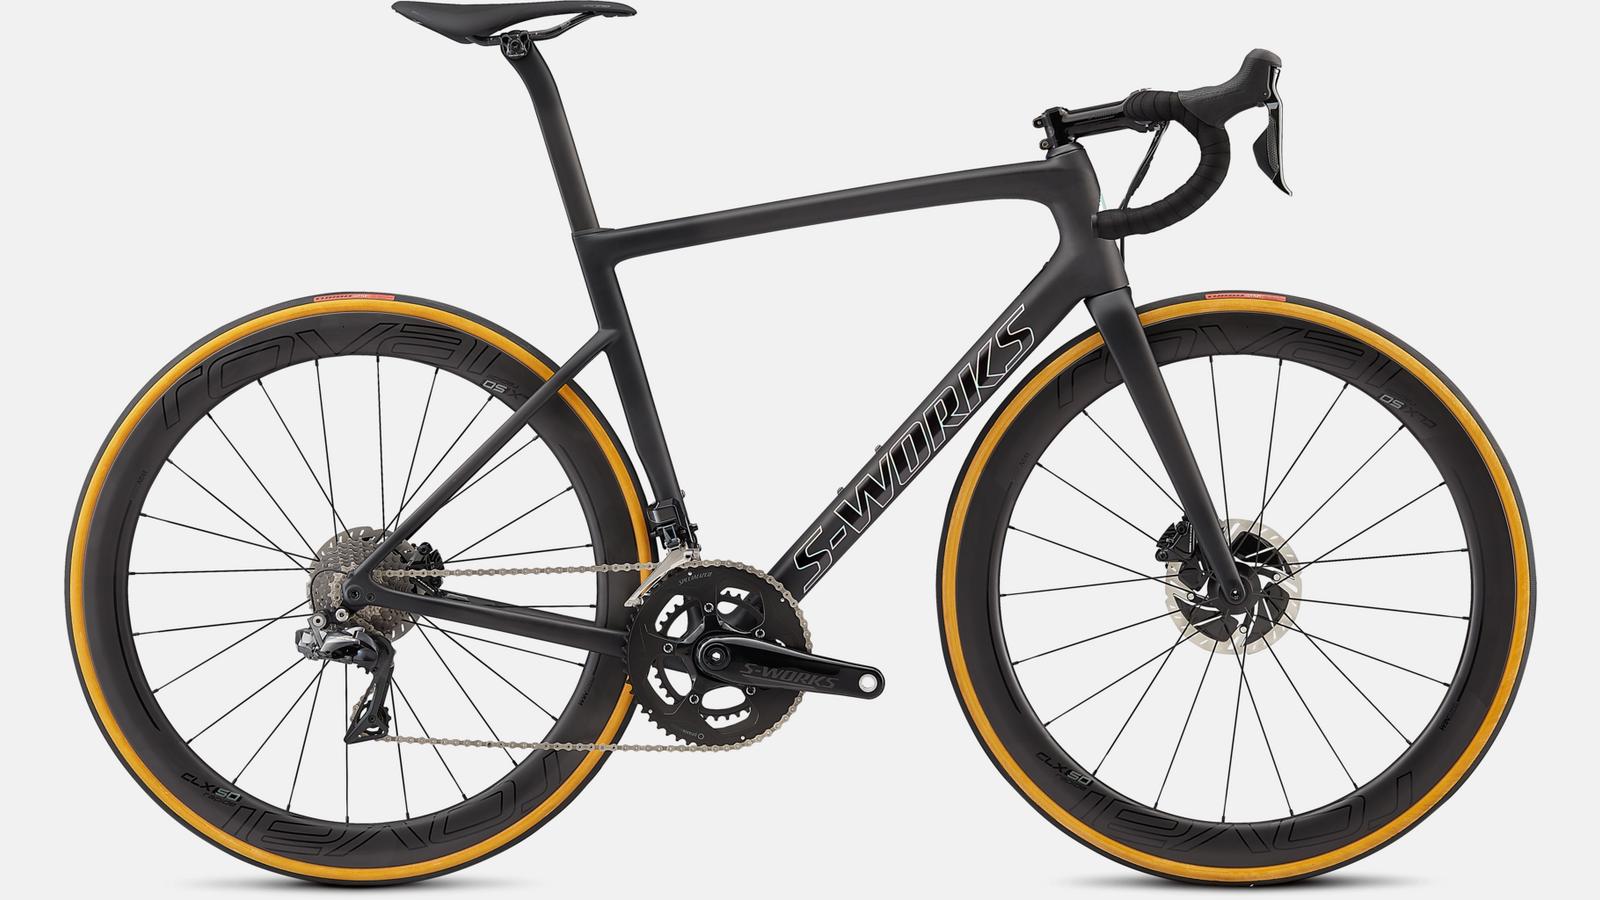 Paint for 2019 Specialized Men's S-Works Tarmac Disc - Satin Black